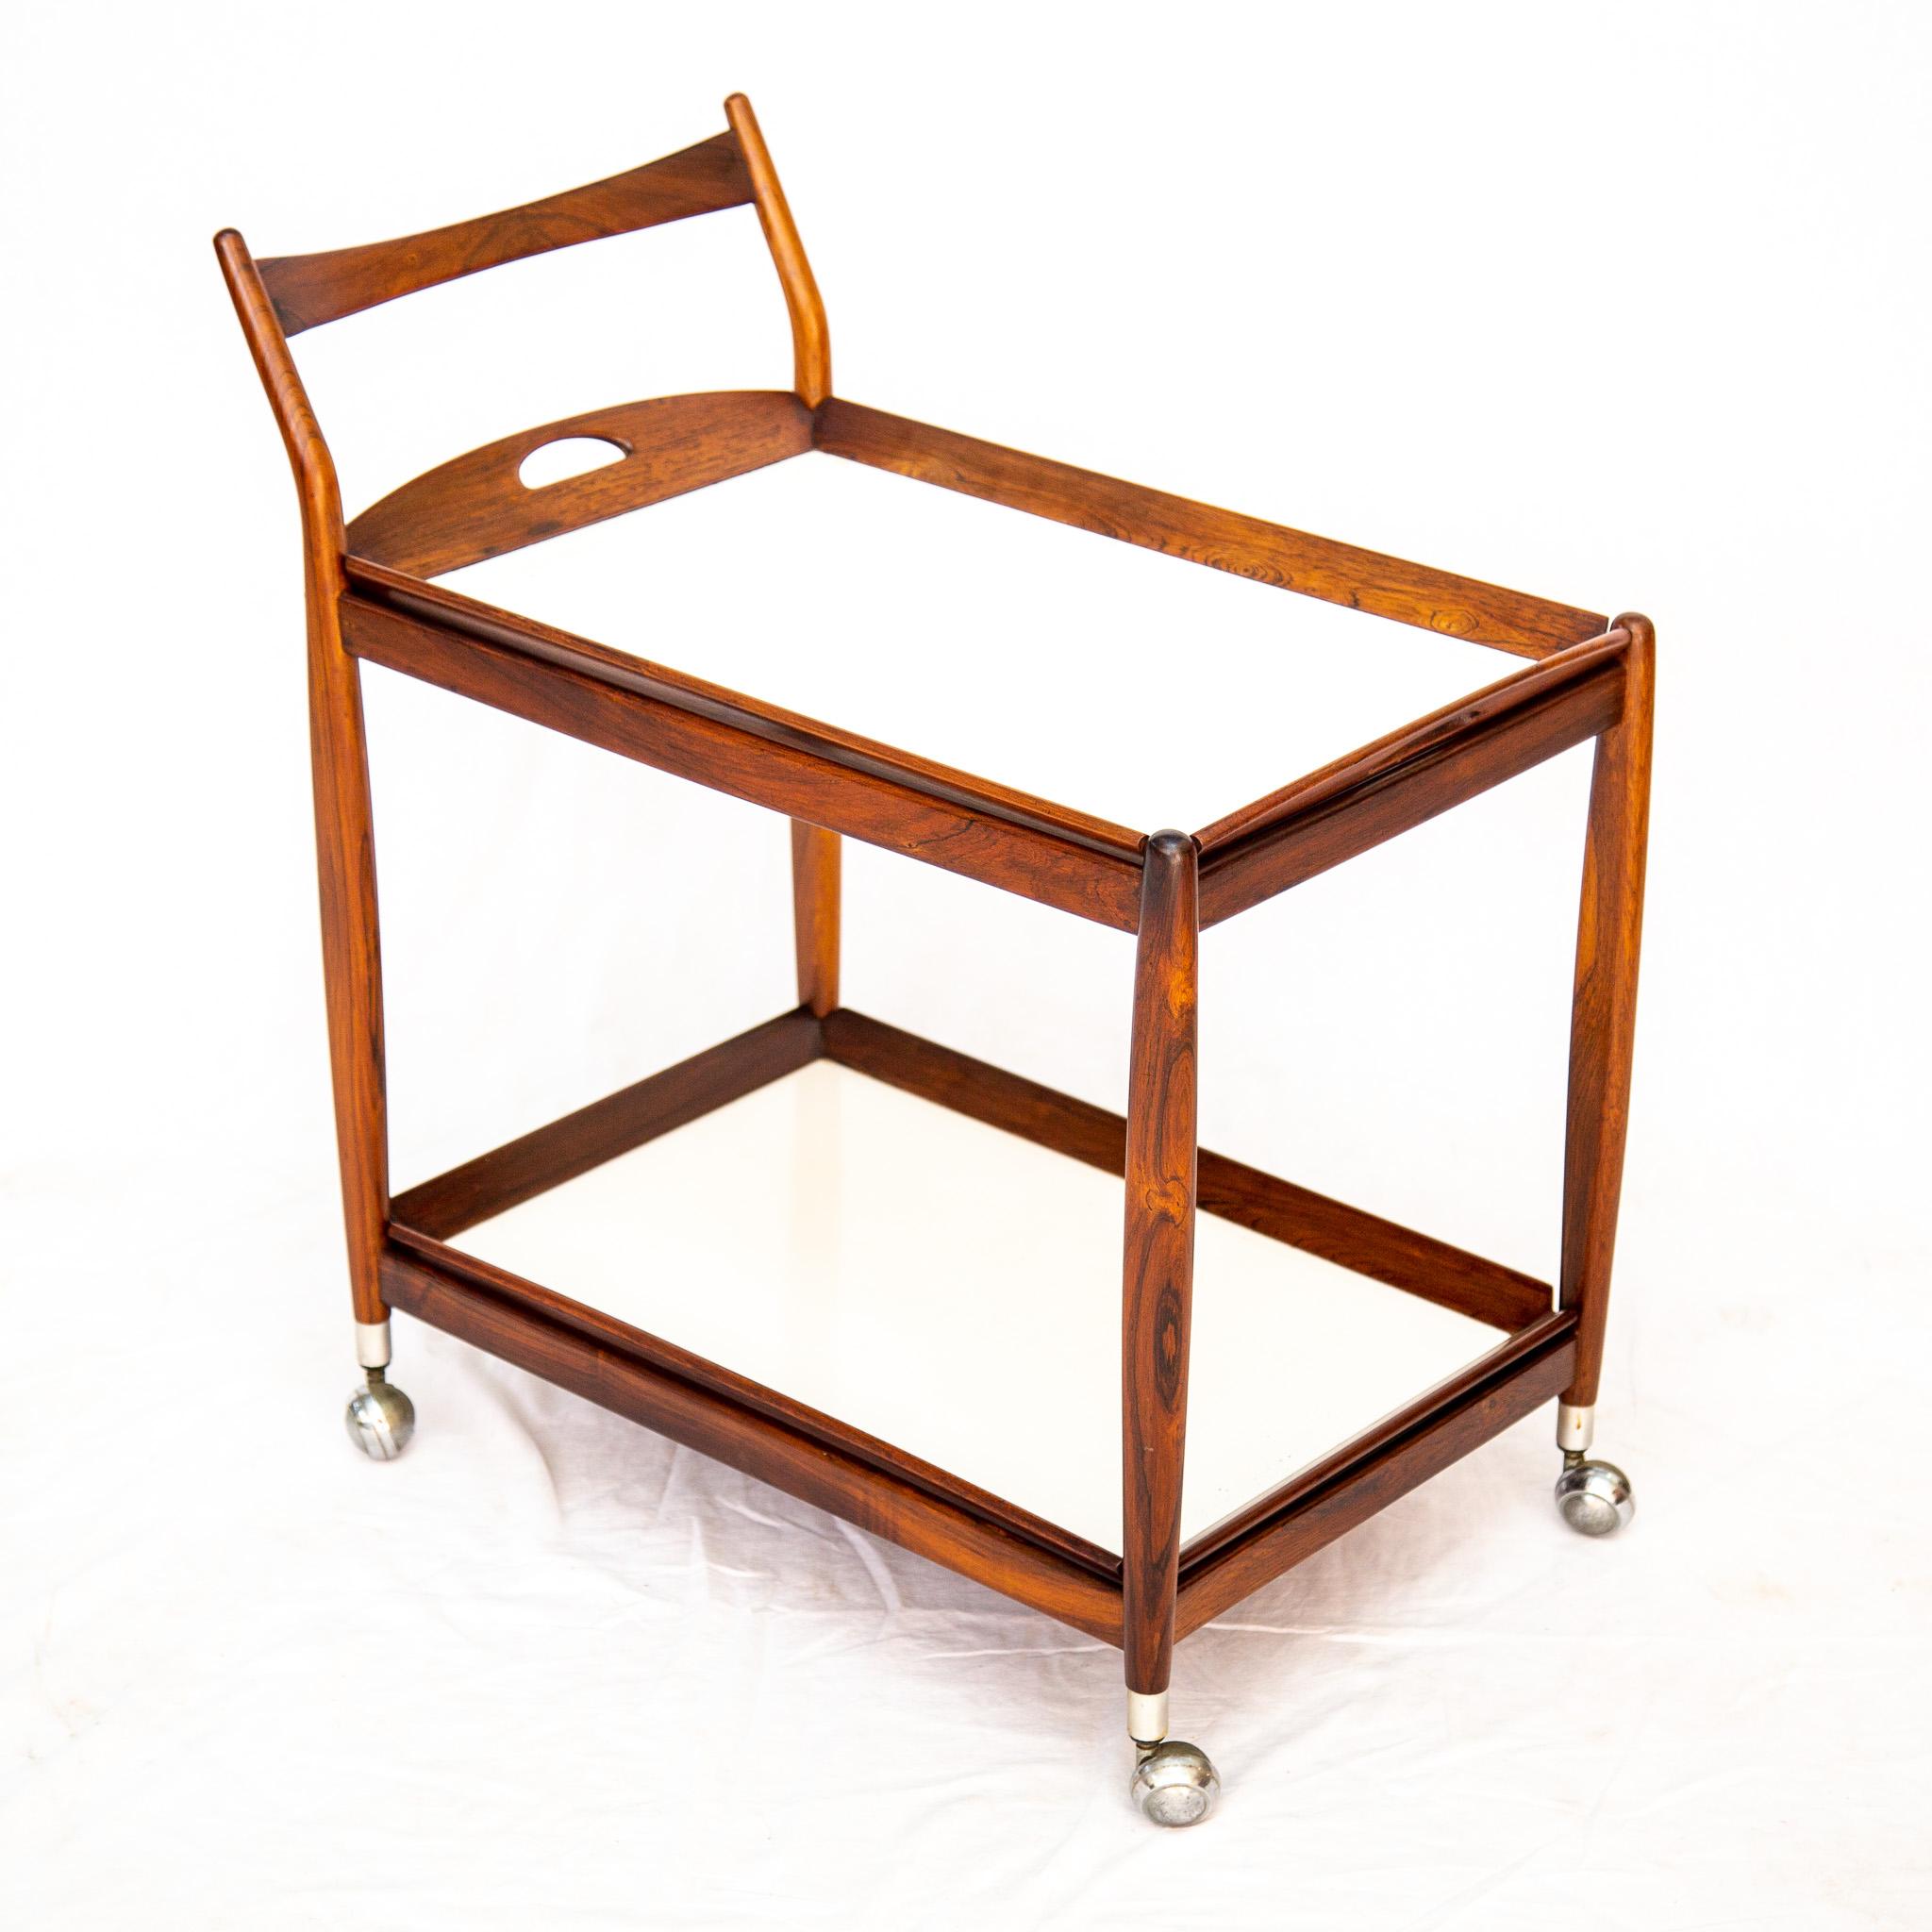 20th Century Mid-Century Modern Bar Cart in Hardwood & White Shelves, Sergio Rodrigues, 1960s For Sale